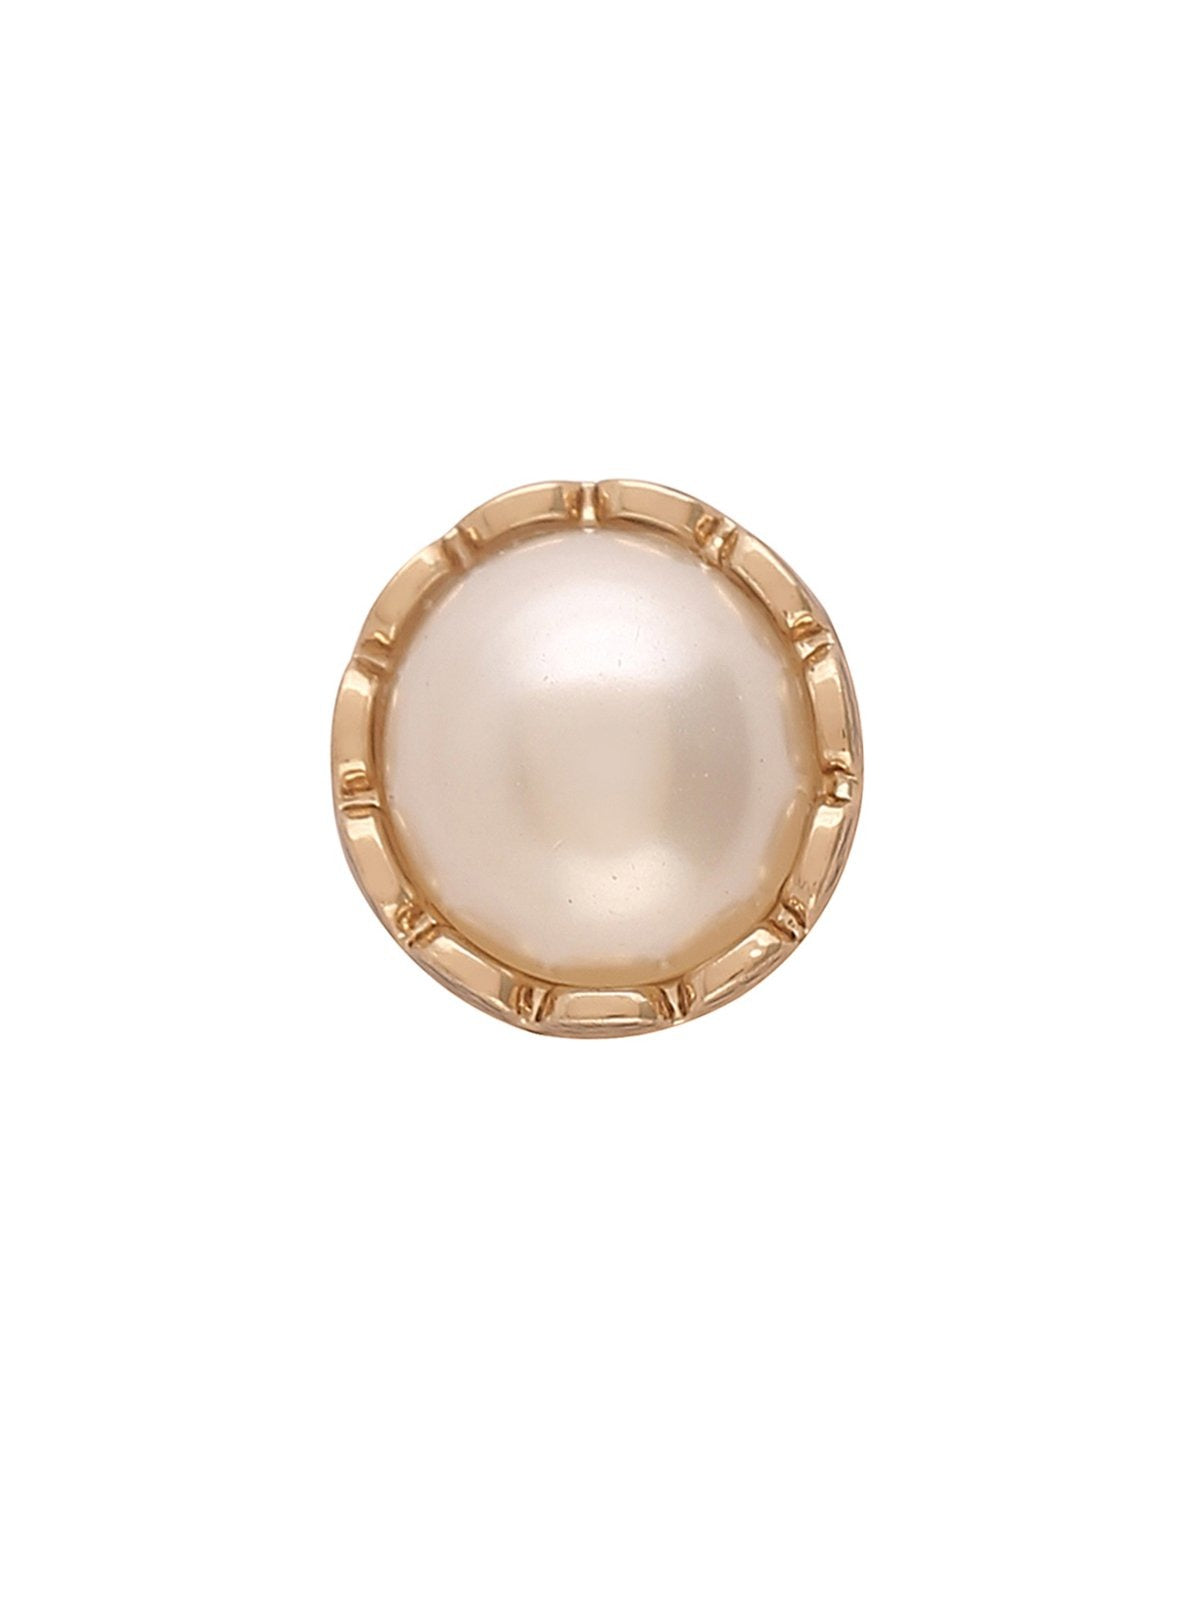 Shiny Round Shape with Scalloped Edges Pearl Button in Golden Color